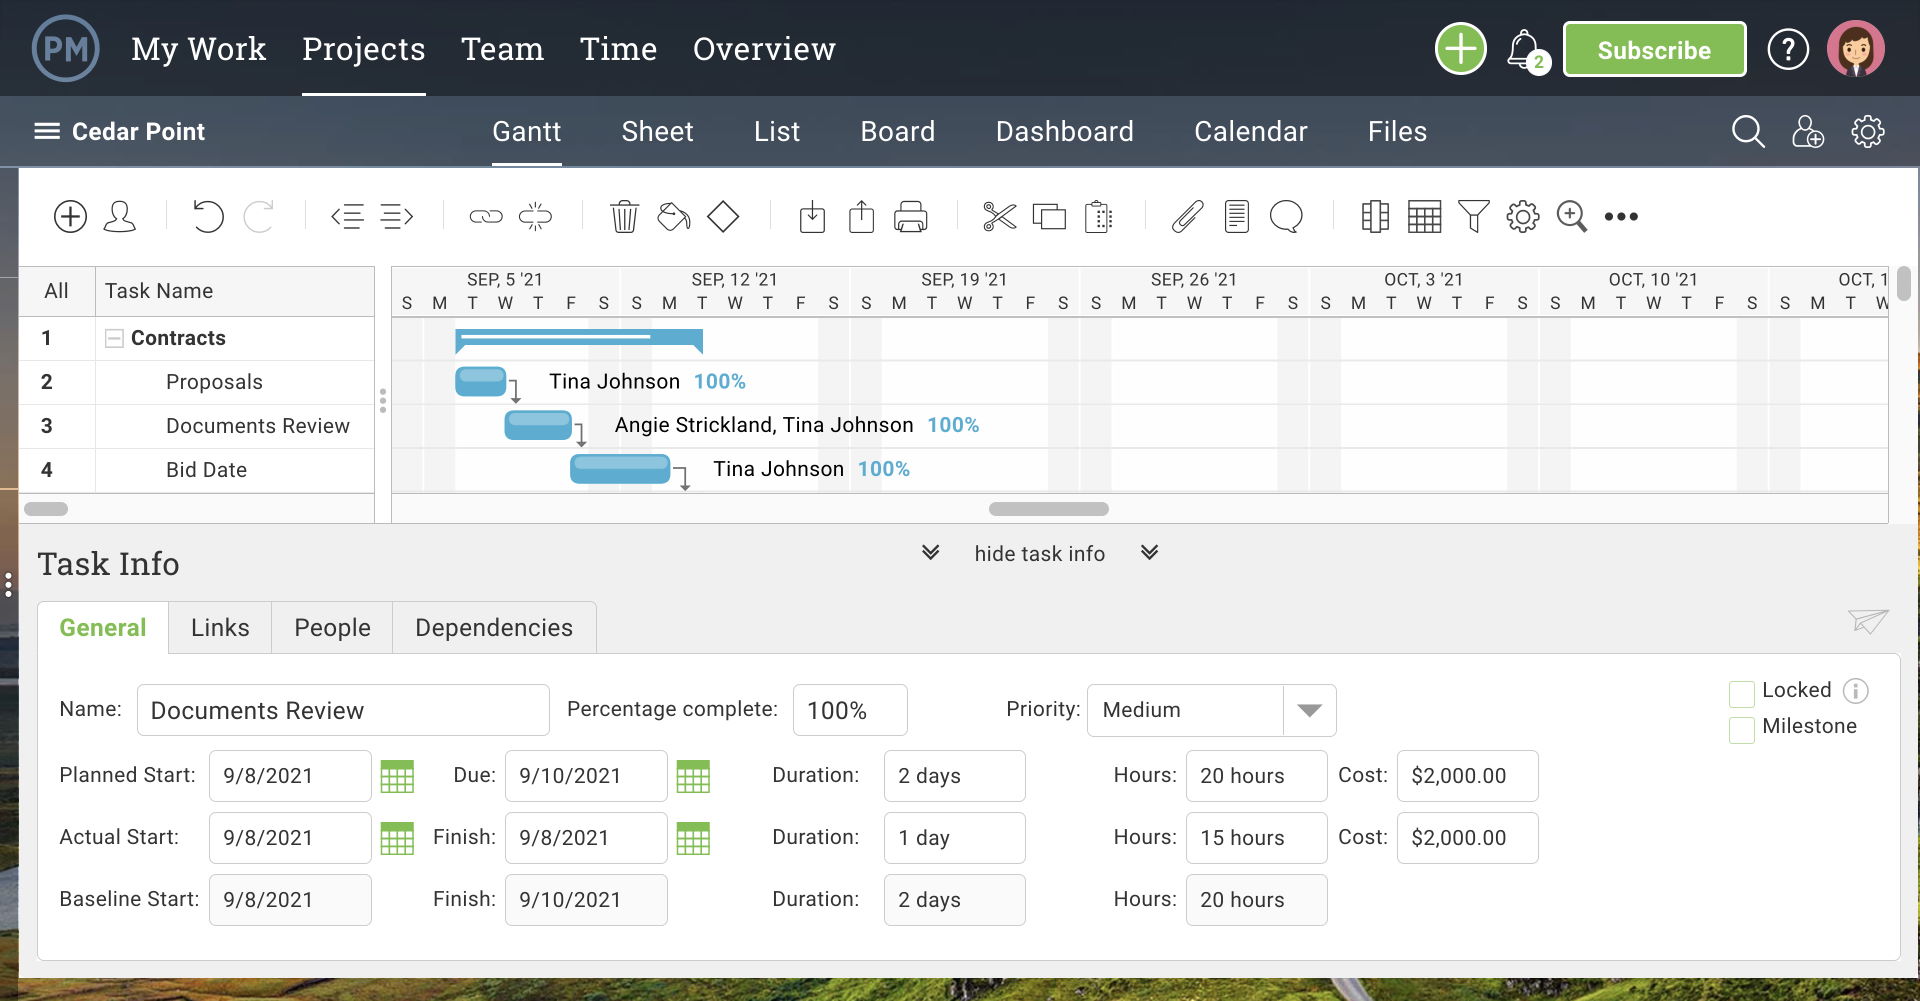 a screenshot of a gantt chart in ProjectManager.com with diamonds on the chart that represent milestones